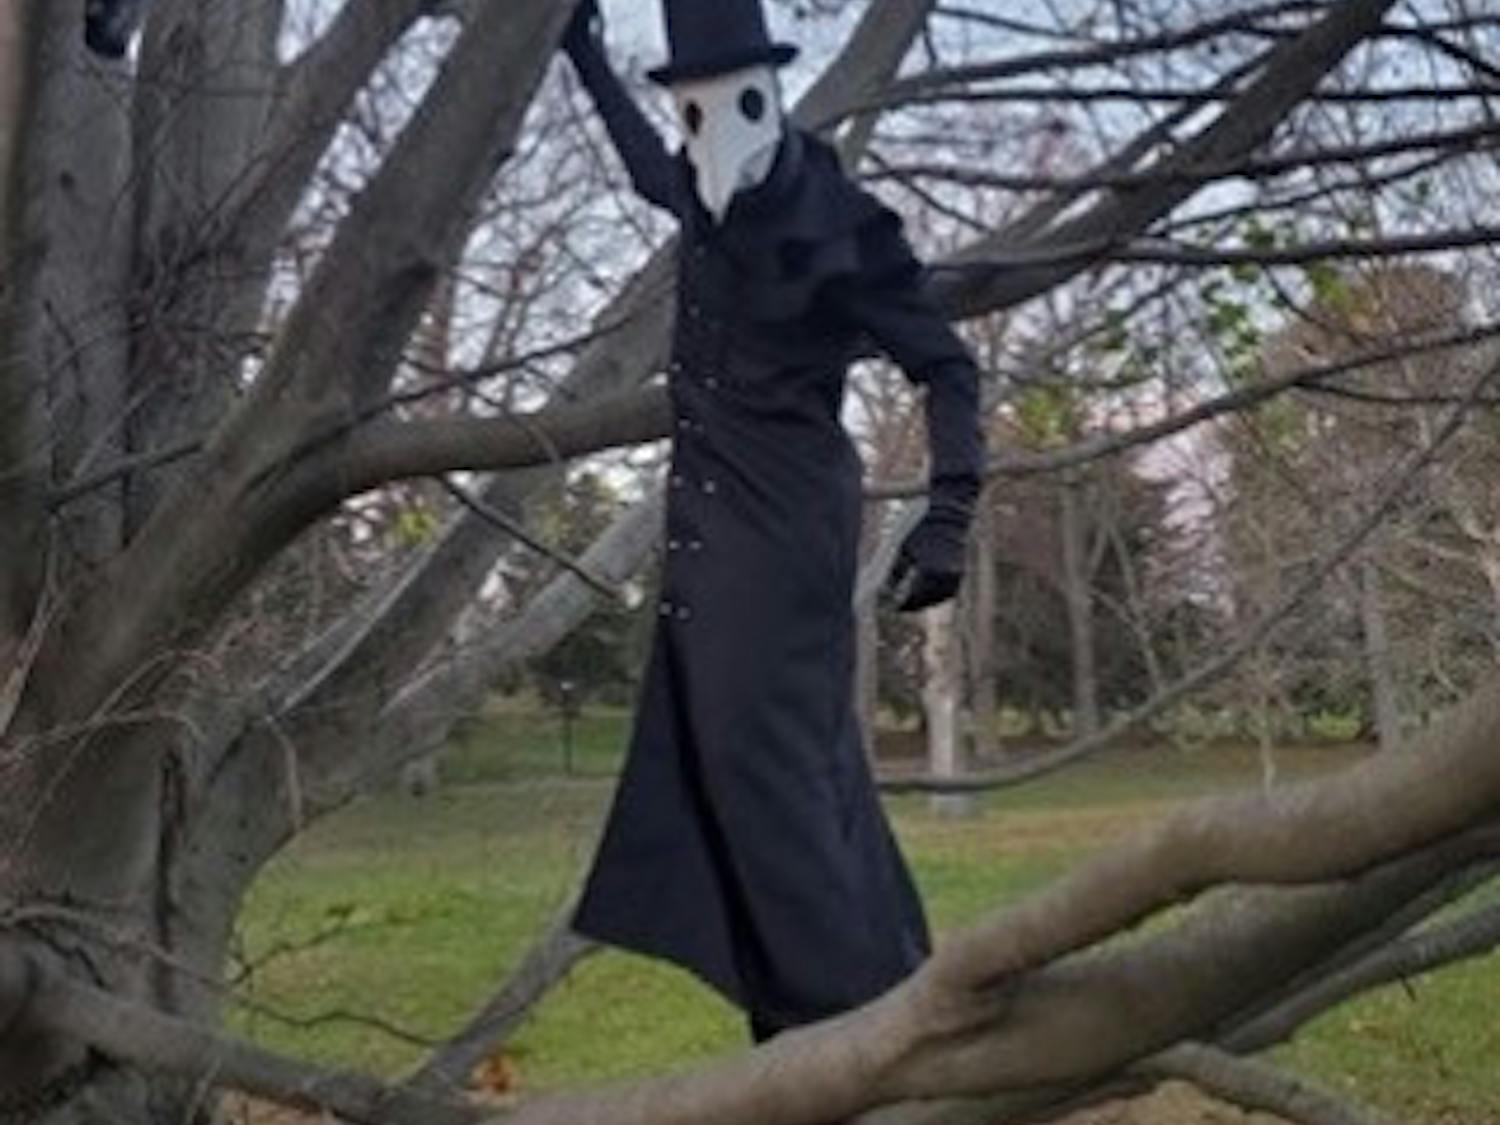 The Plague Doctor turned heads in Oct. 2022 when they started walking around campus in an arguably-scary costume (Photo courtesy of the Plague Doctor).